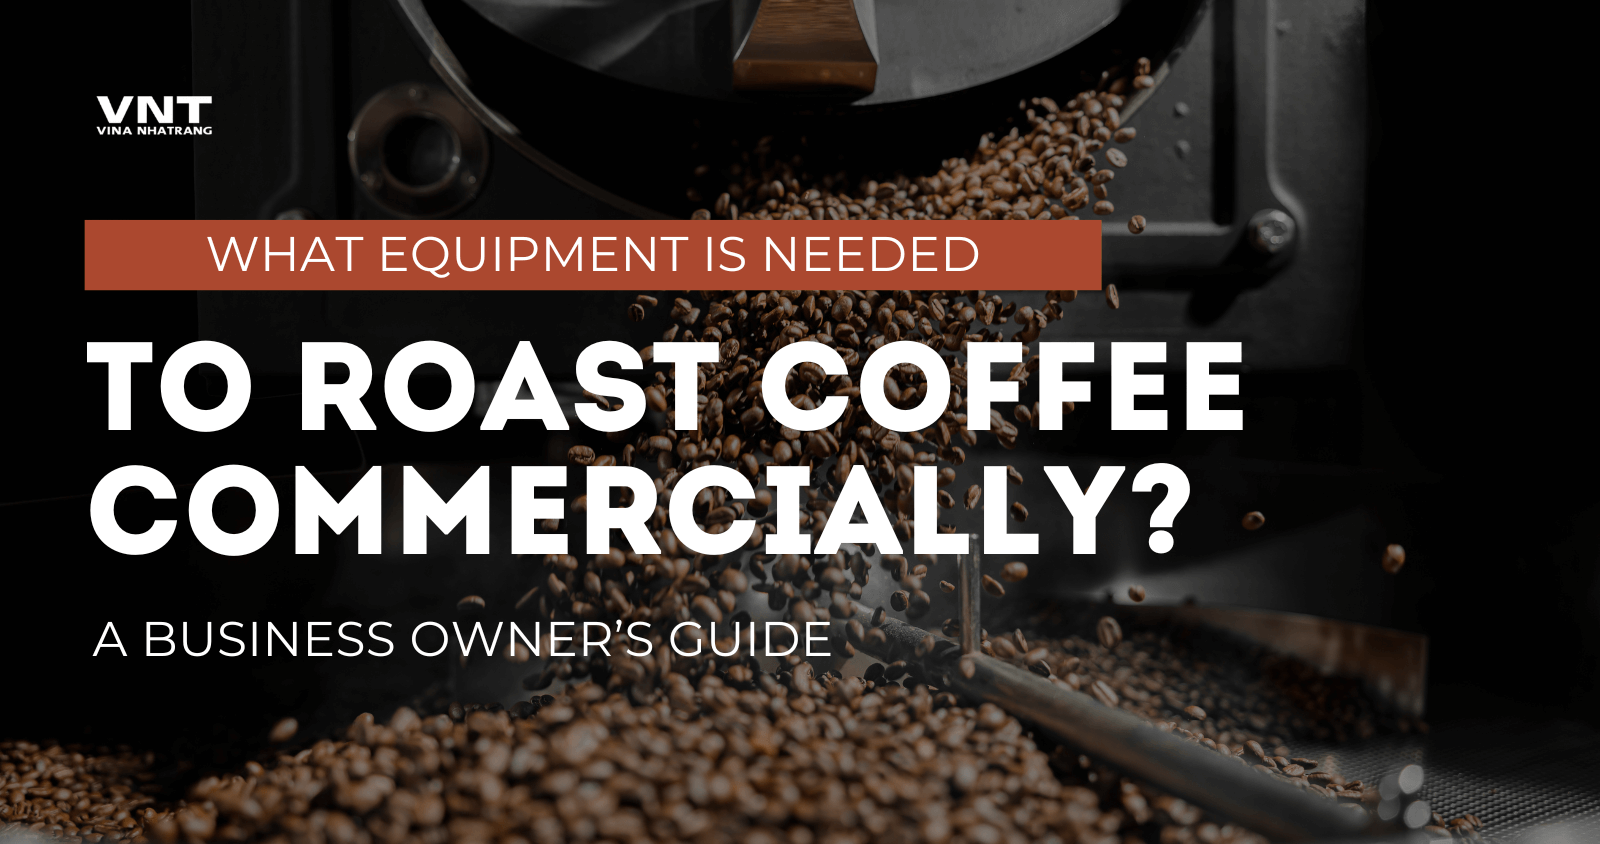 Essential Coffee Roaster Equipments – What Equipment is Needed to Roast Coffee Commercially?